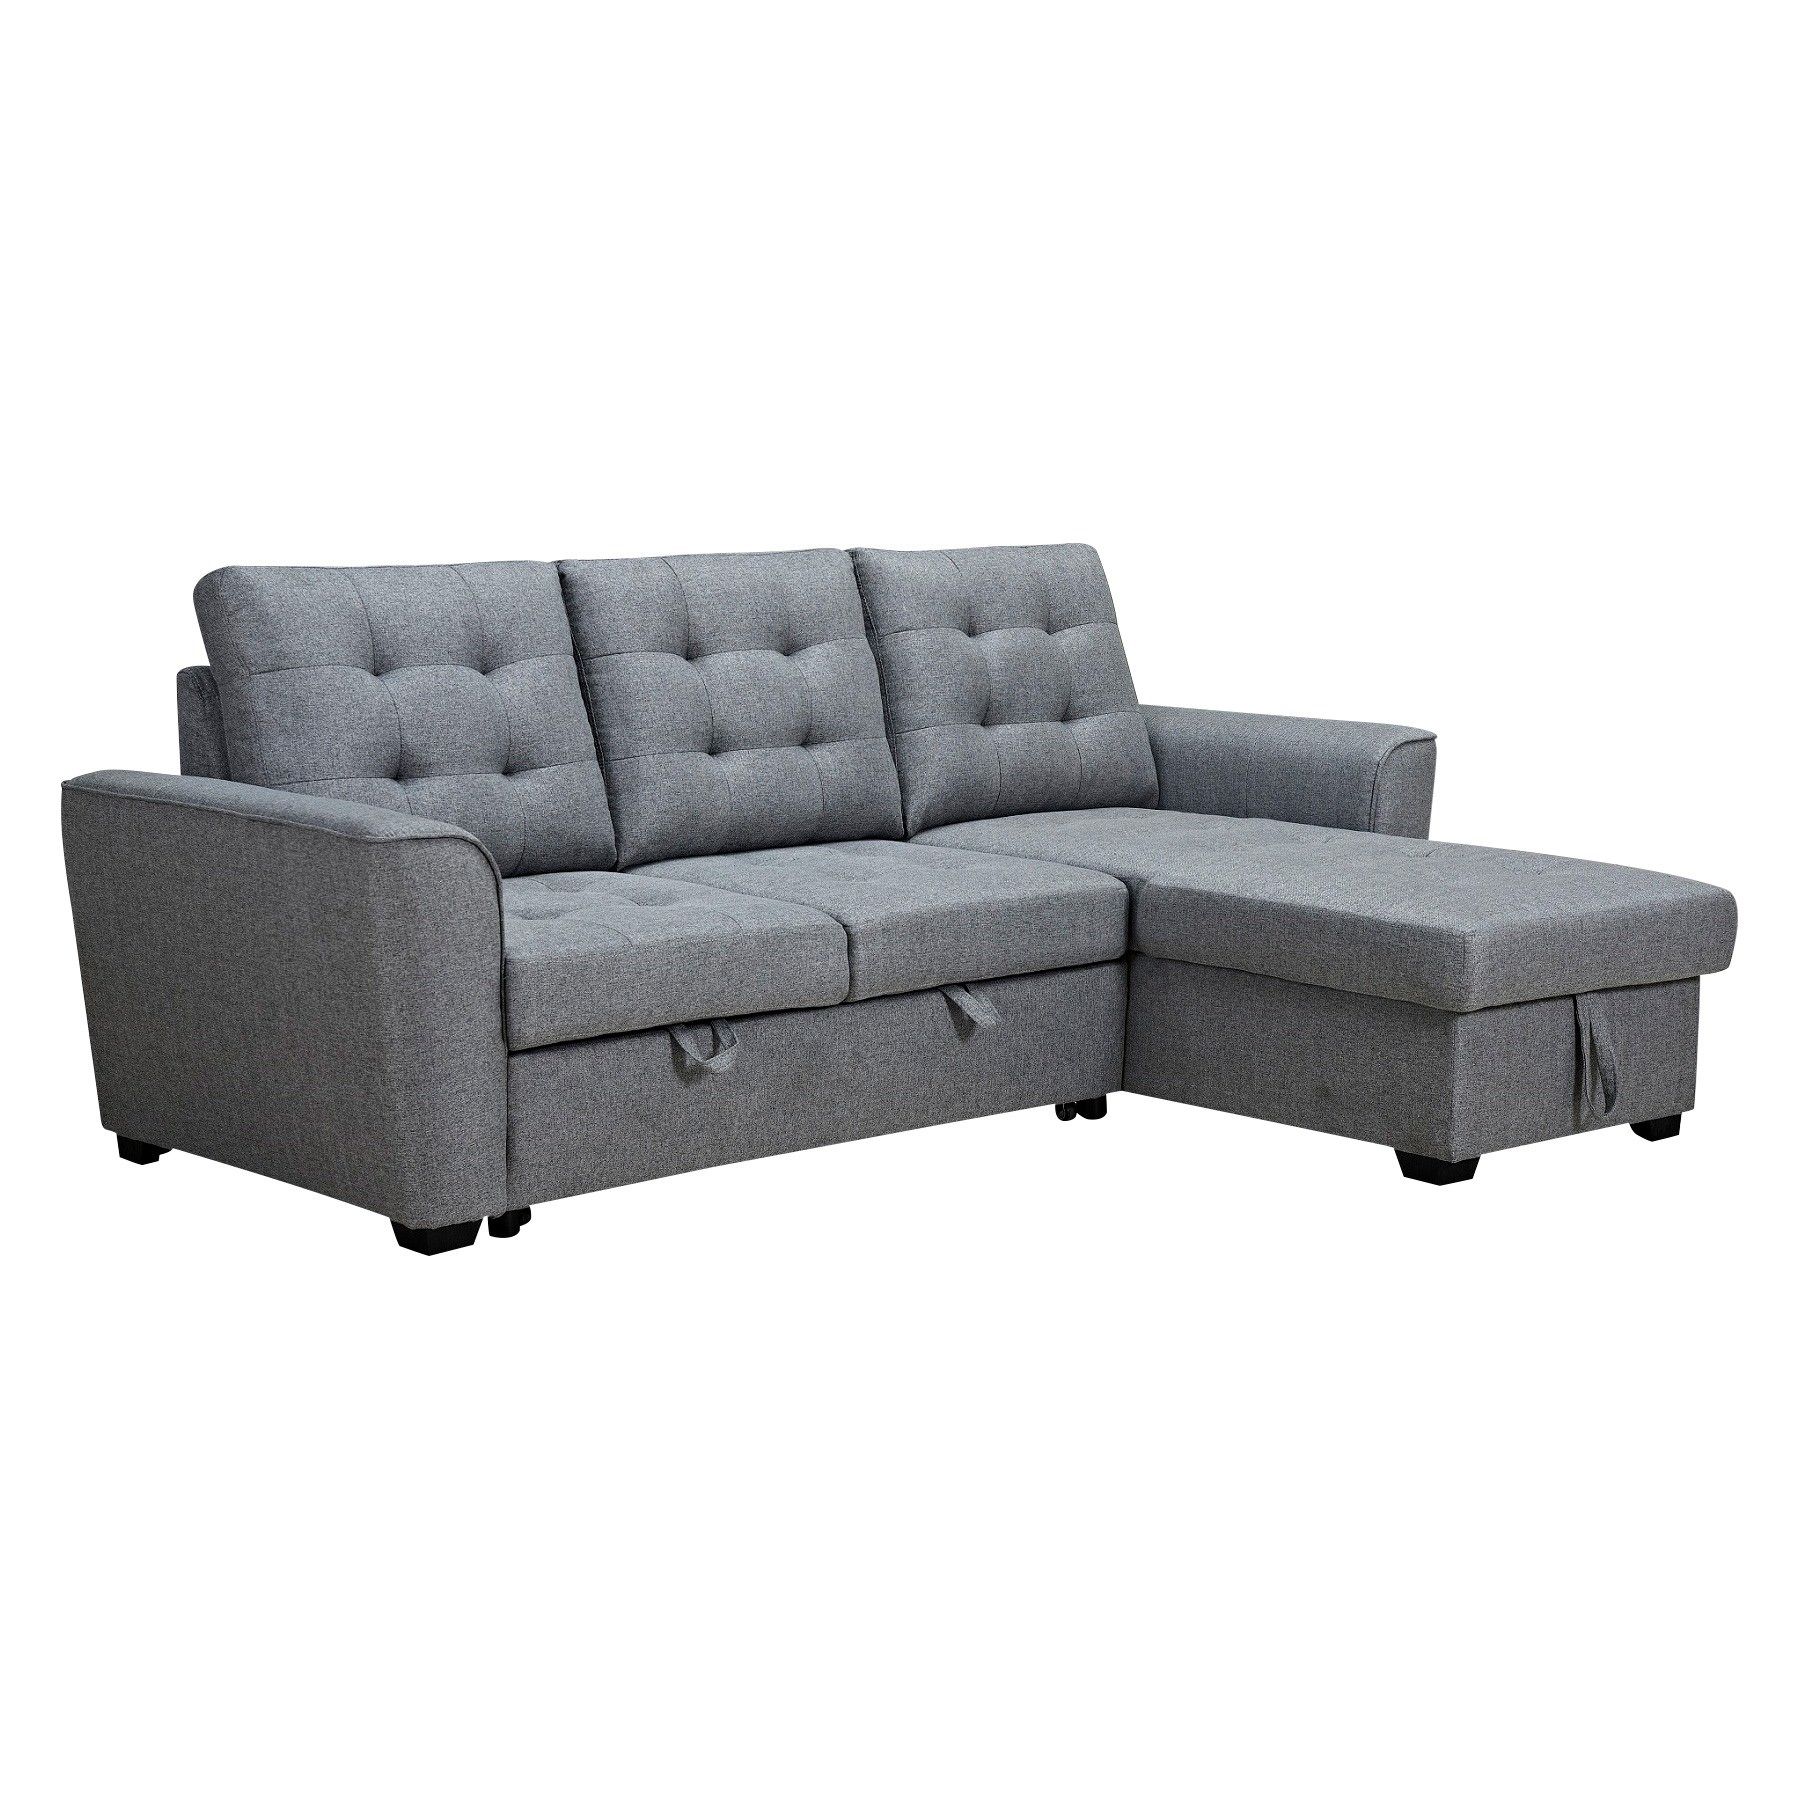 Mardi Fabric Sofa / Pull Out Sofa Bed, 2 Seater With Reversible Storage Pertaining To 2 In 1 Gray Pull Out Sofa Beds (View 6 of 20)